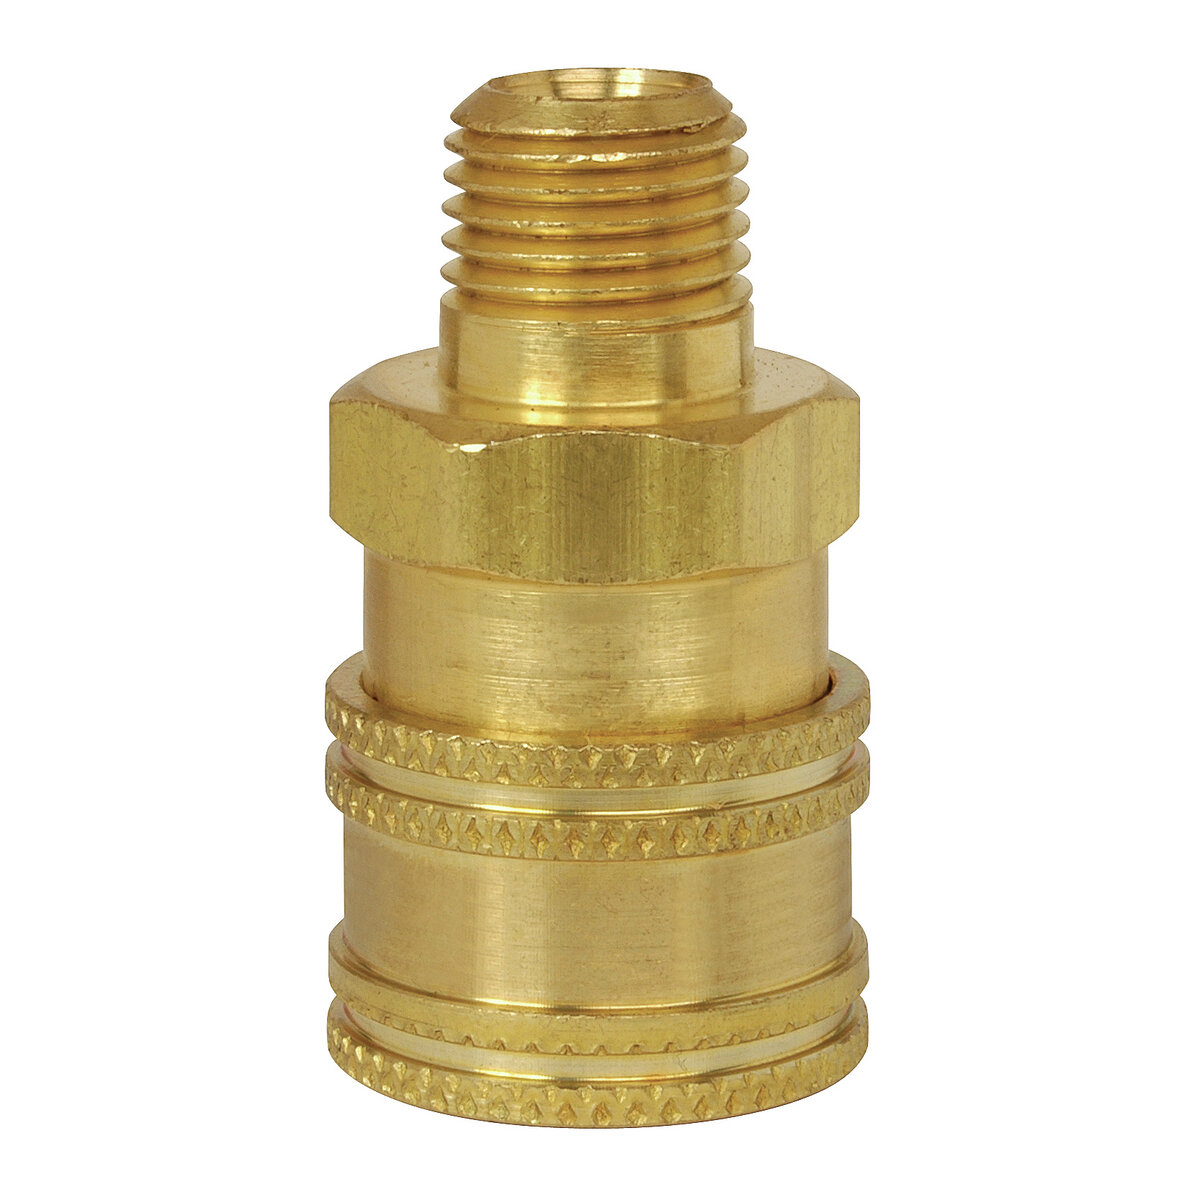 Airgas - LINK5105-28 - Lincoln® 1/4 NPT-M Quick Disconnect